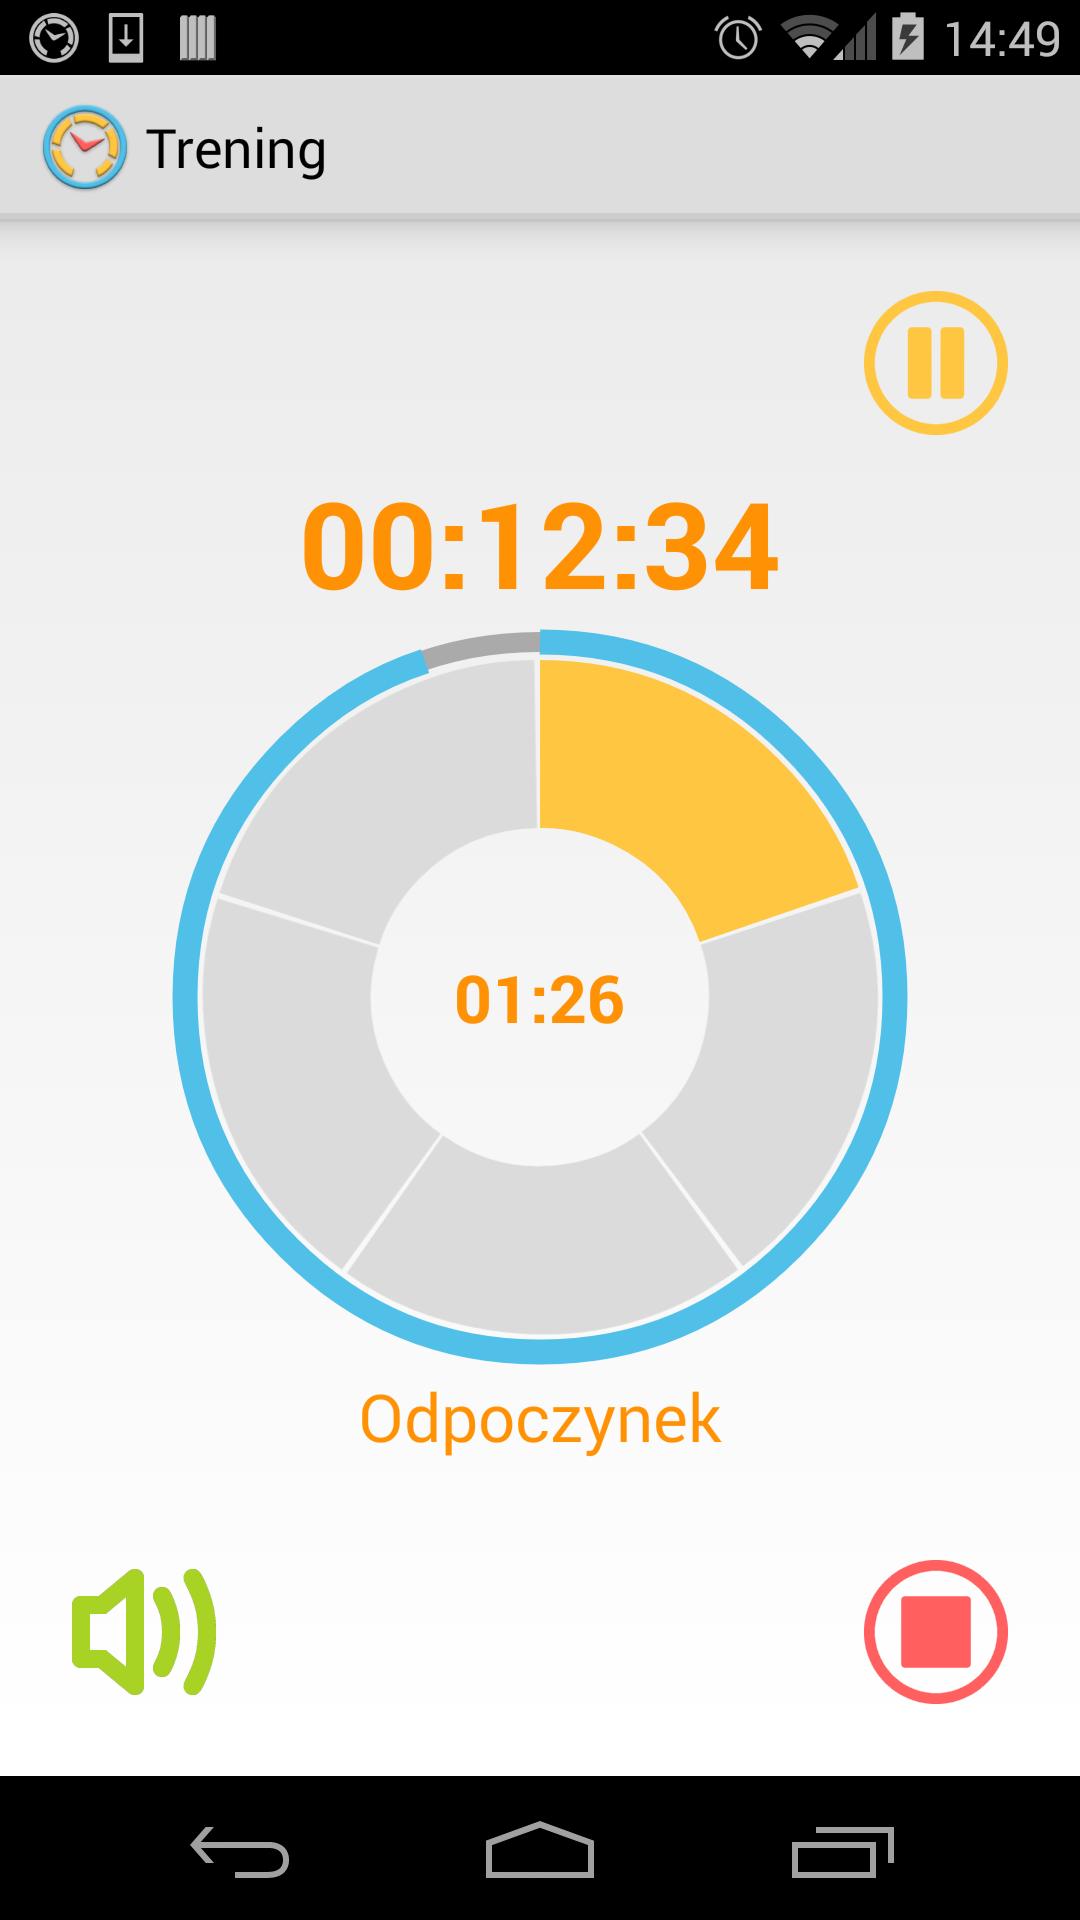 Interwały for Android - APK Download